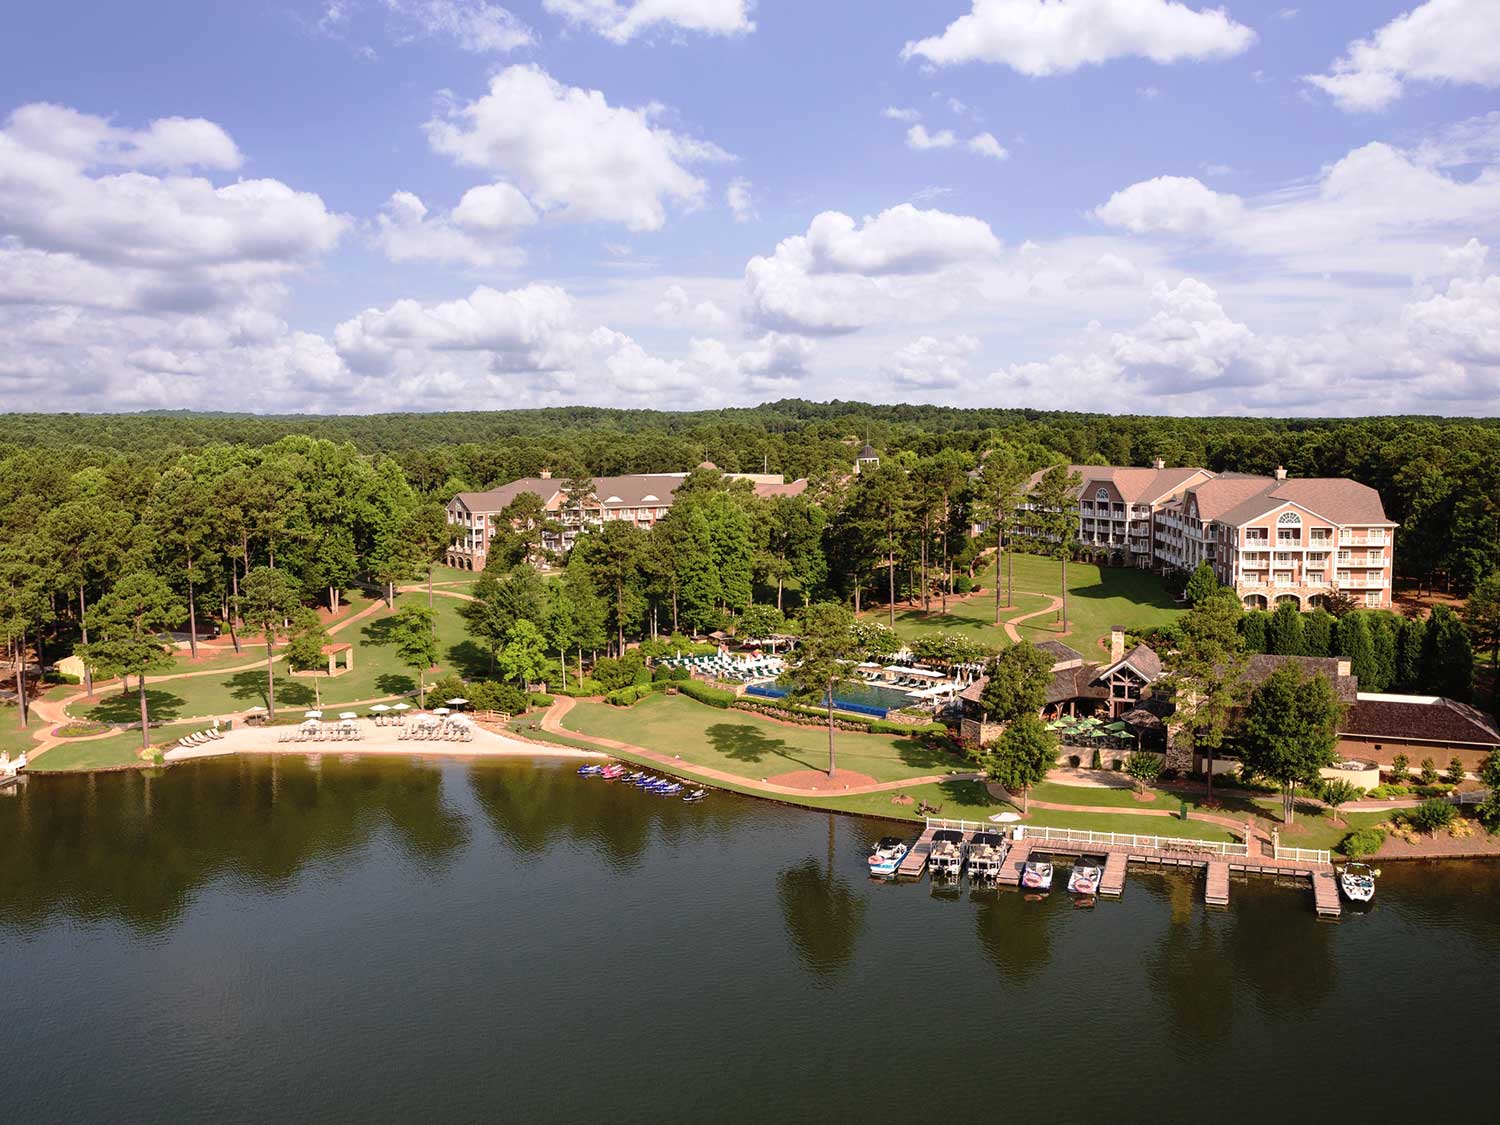 The Ritz-Carlton, Reynolds Lake Oconee is set right on the water and surrounded by the area's rich forestry.